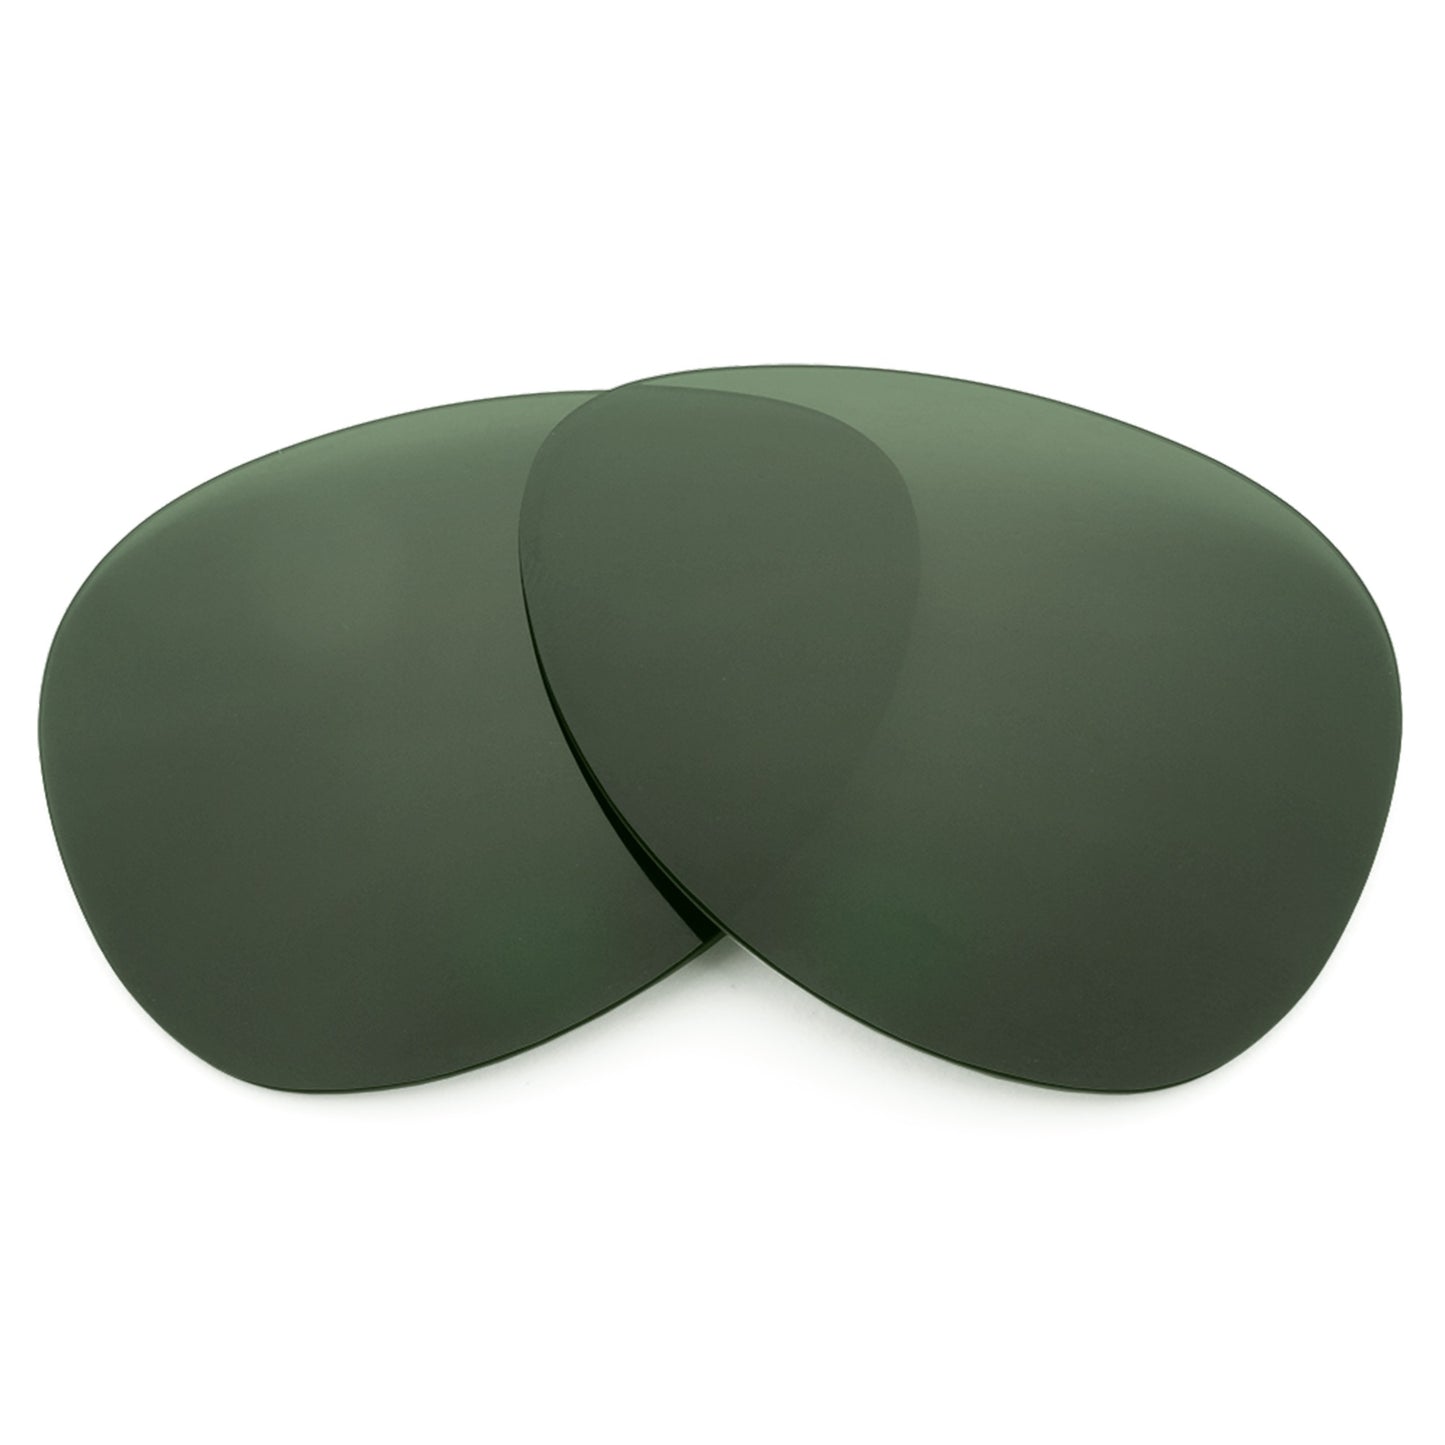 Revant replacement lenses for Ray-Ban New Aviator RB3625 62mm Non-Polarized Gray Green